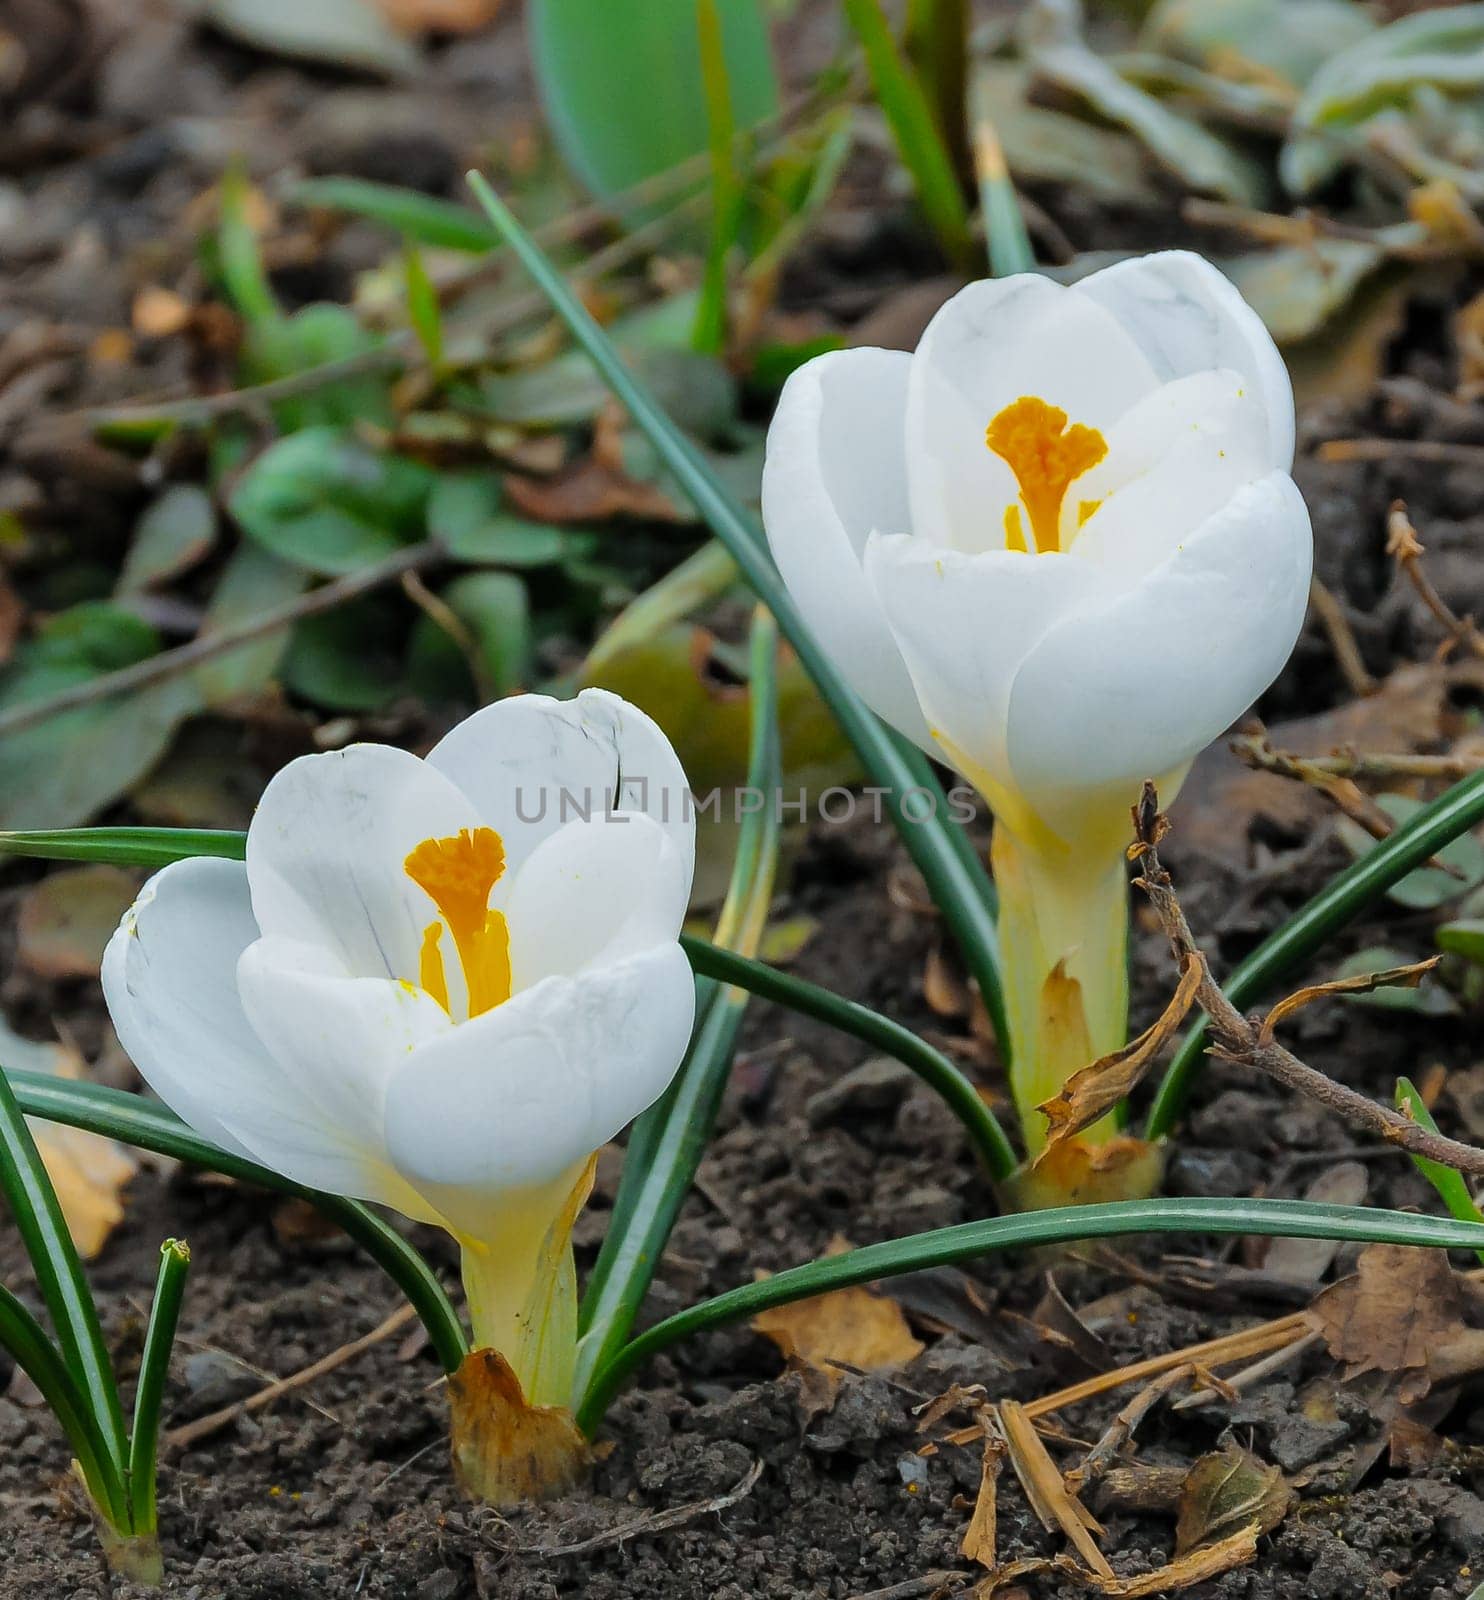 Early flowering garden plant Crocus with white flowers